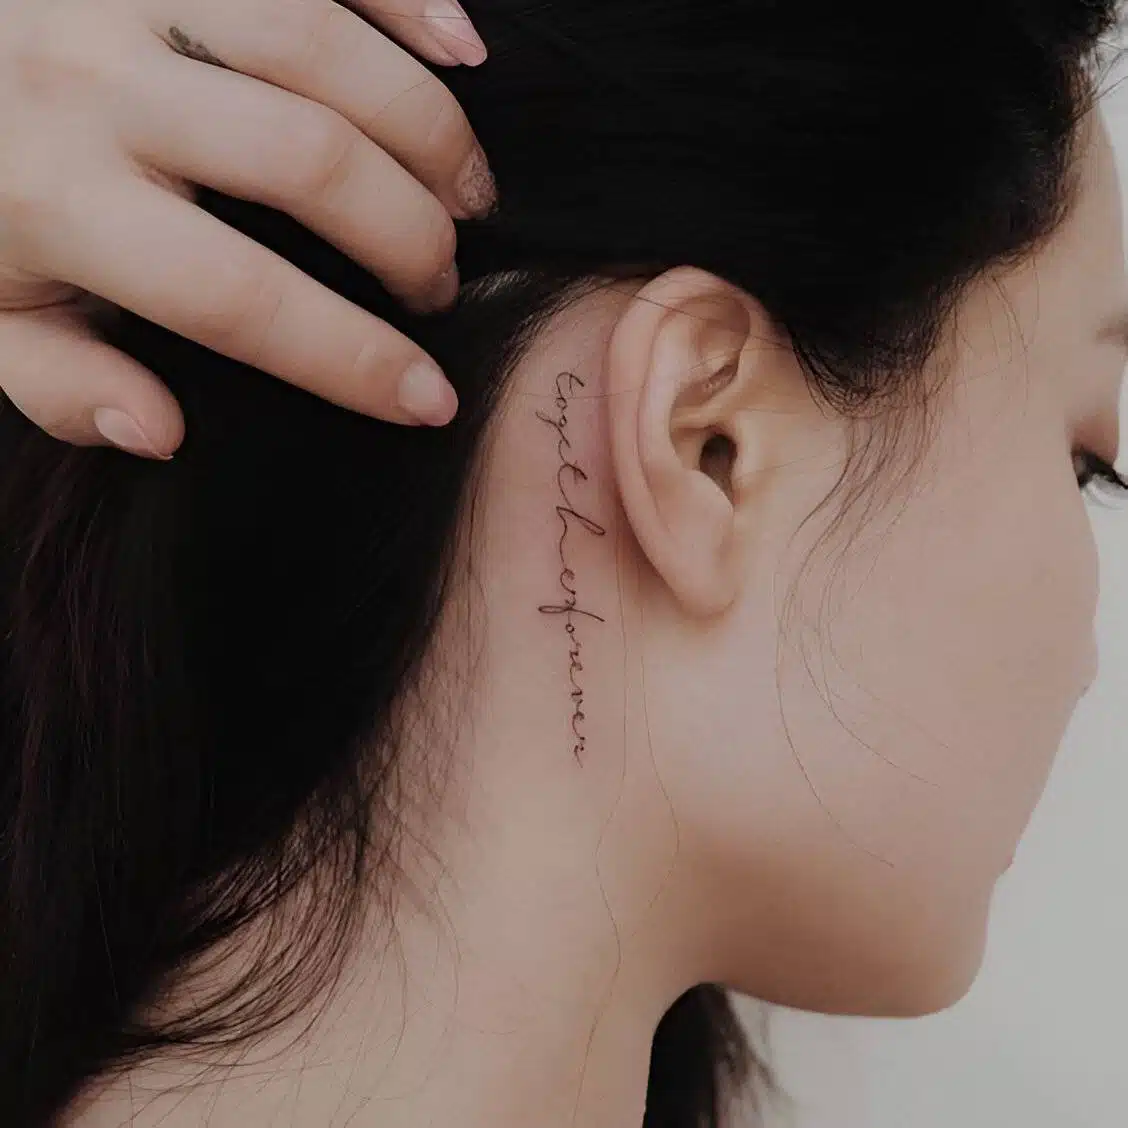 25 Low-key Stunning Behind The Ear Tattoos To Get ASAP - 185